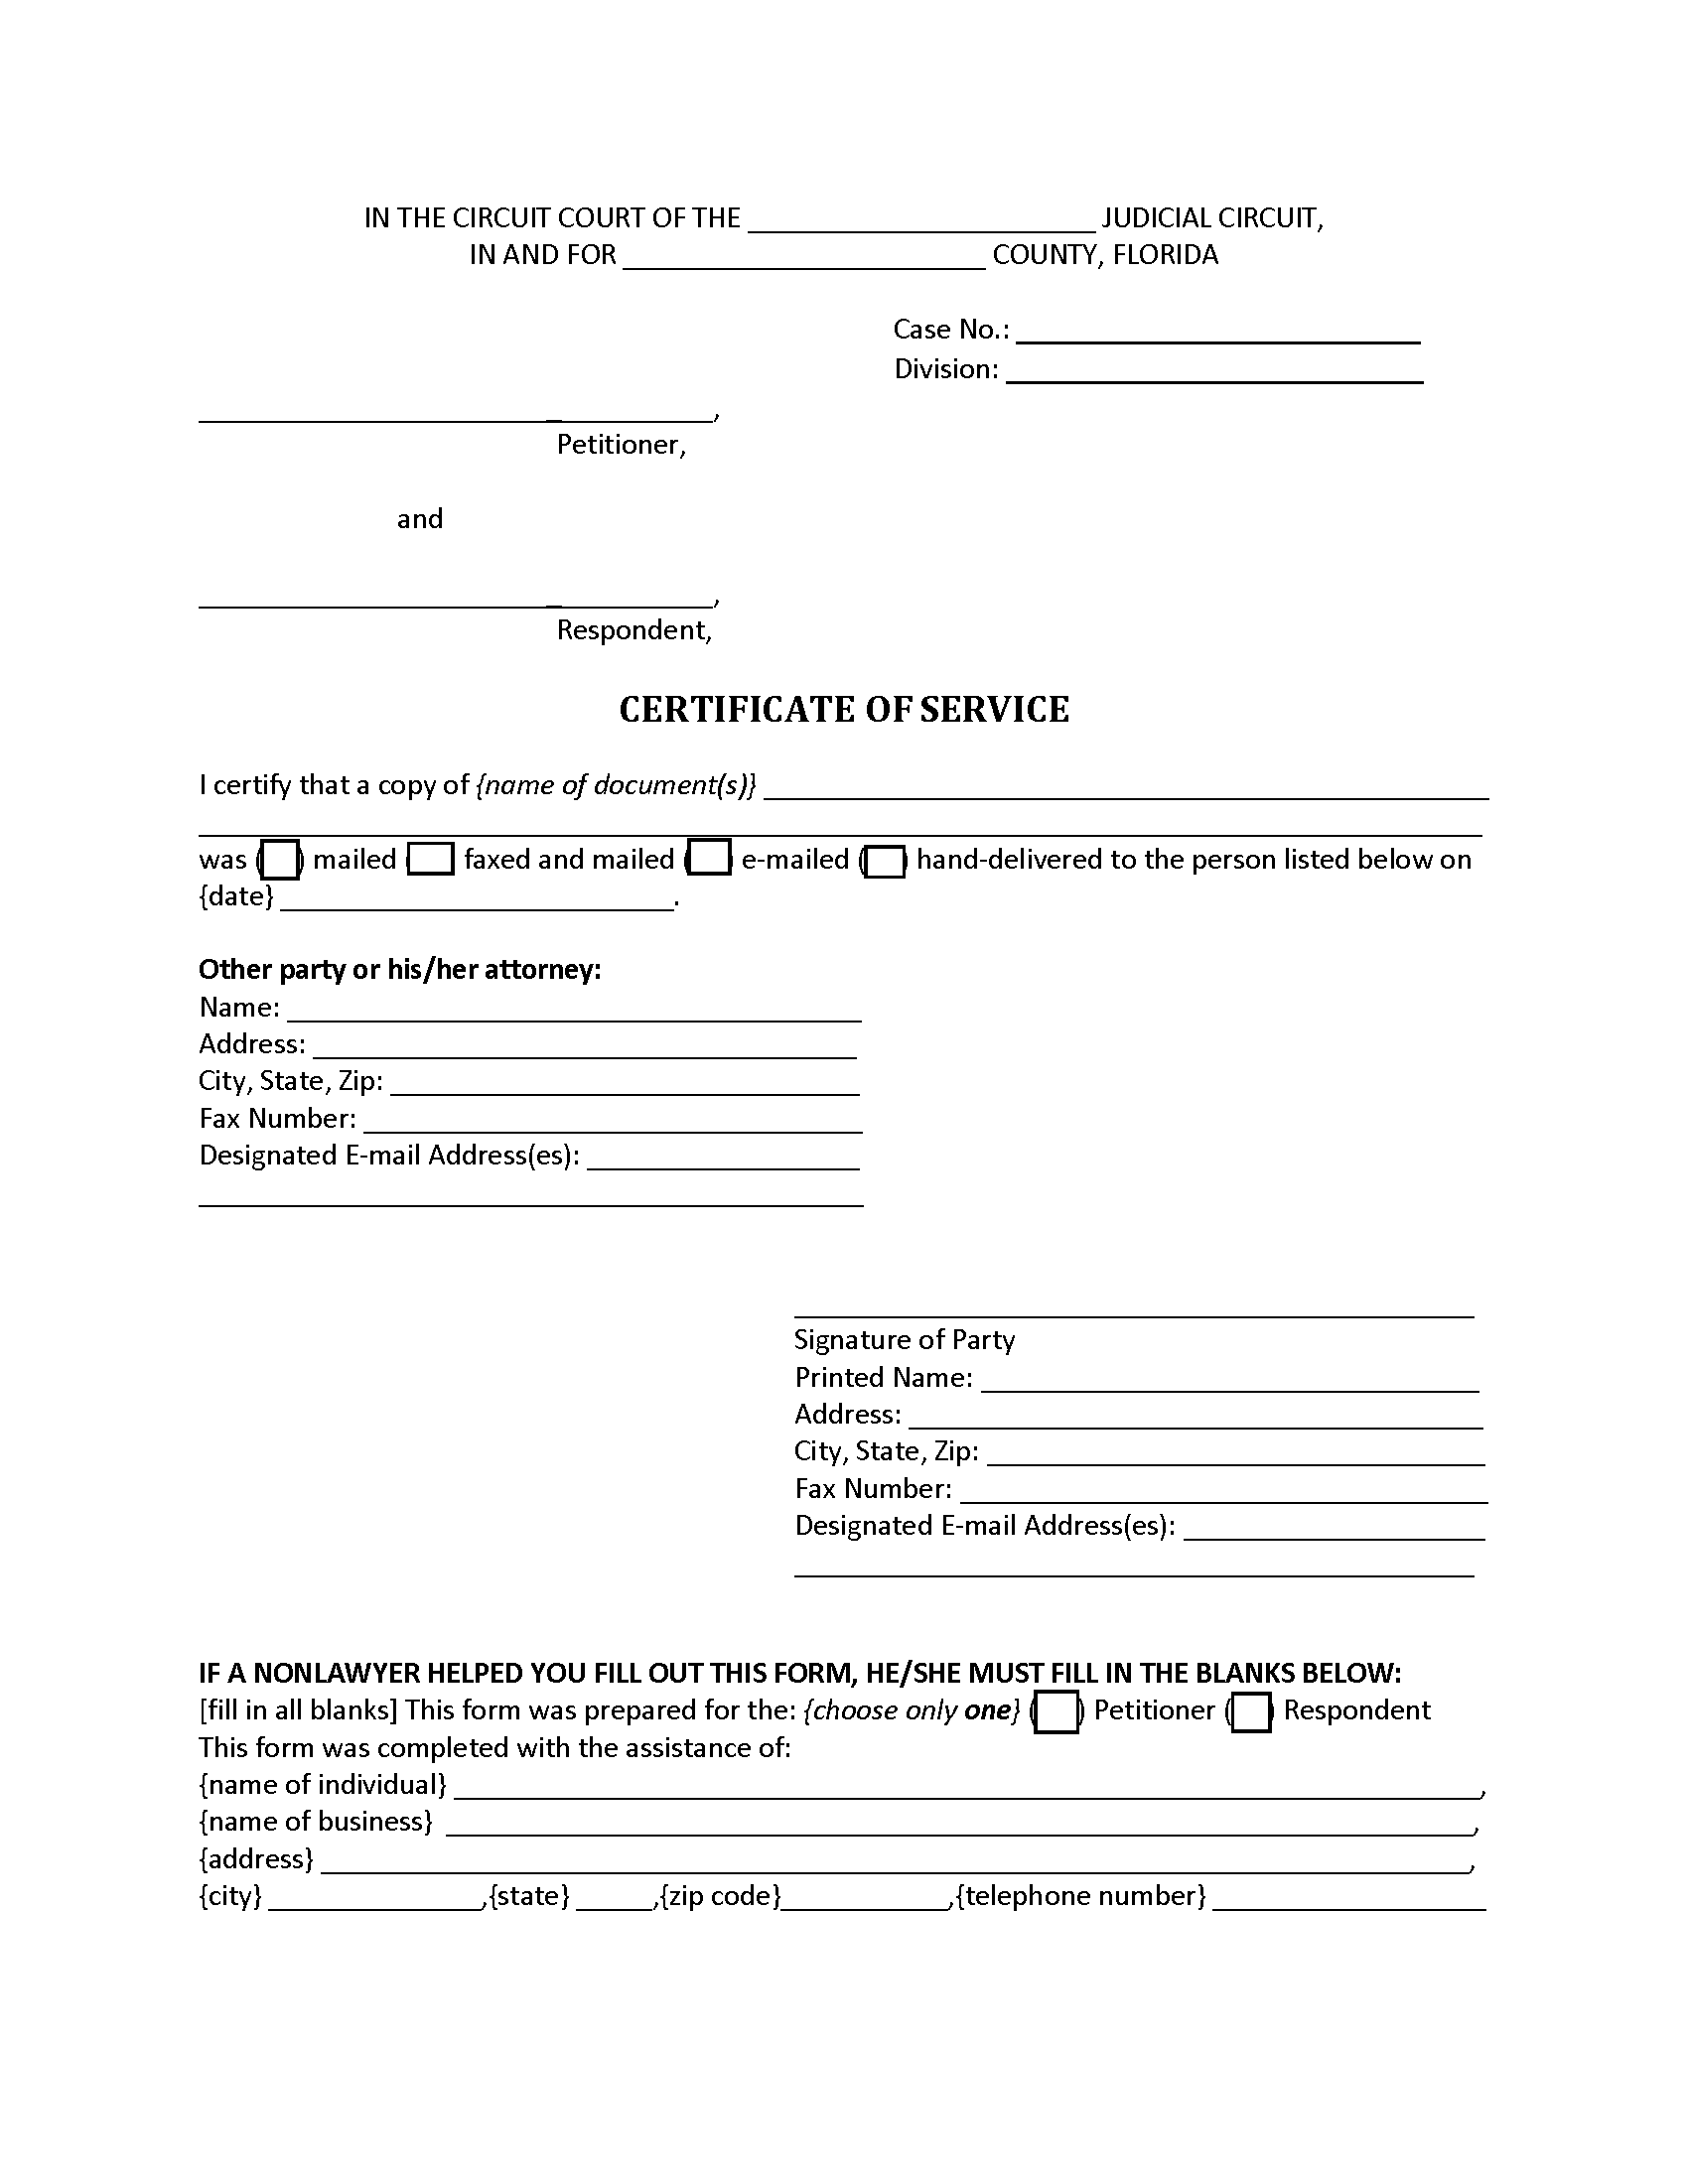 Certificate of Service Form